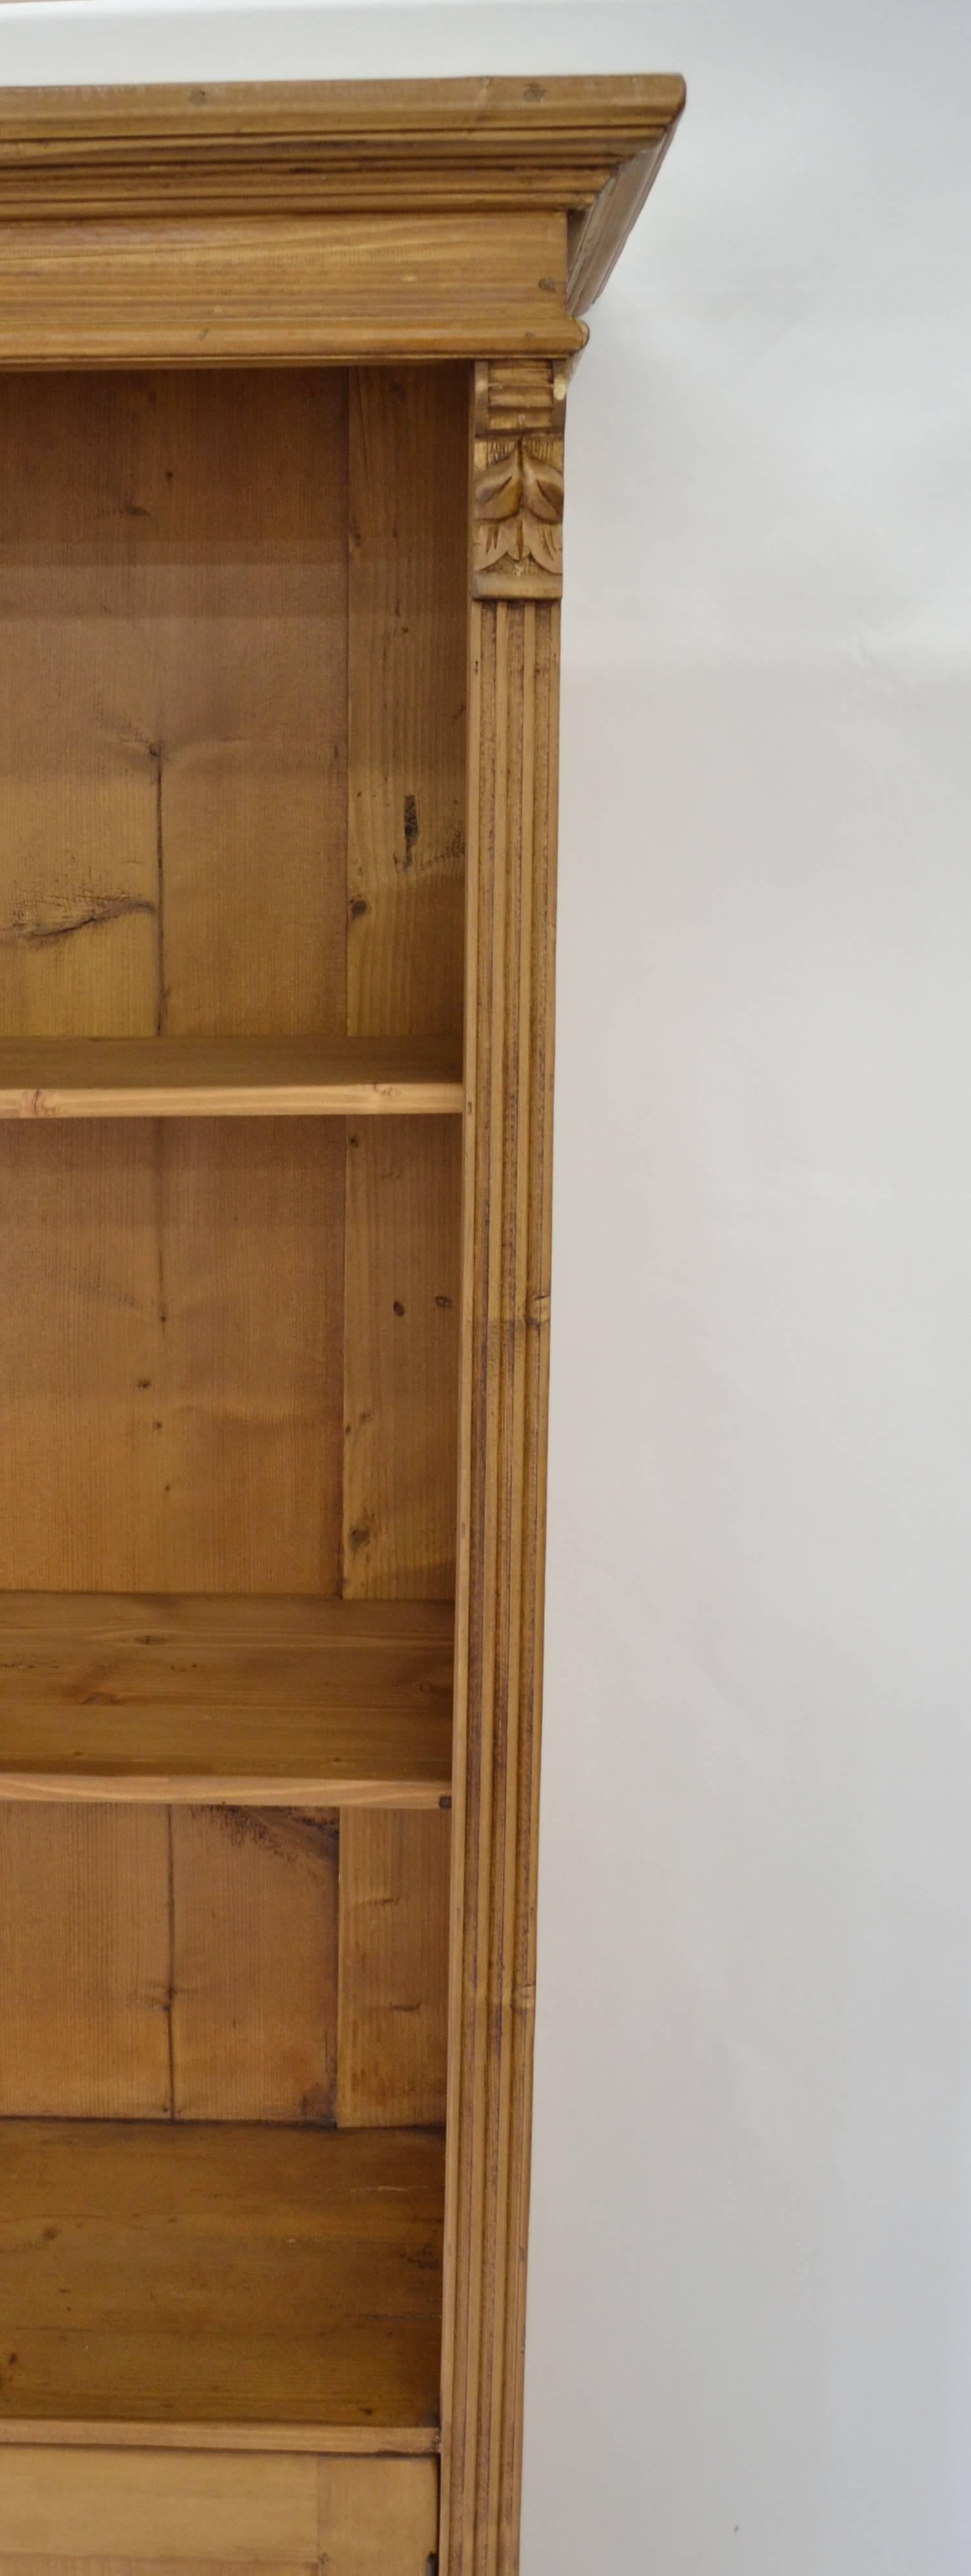 Polished Pine Bookcase with Doors